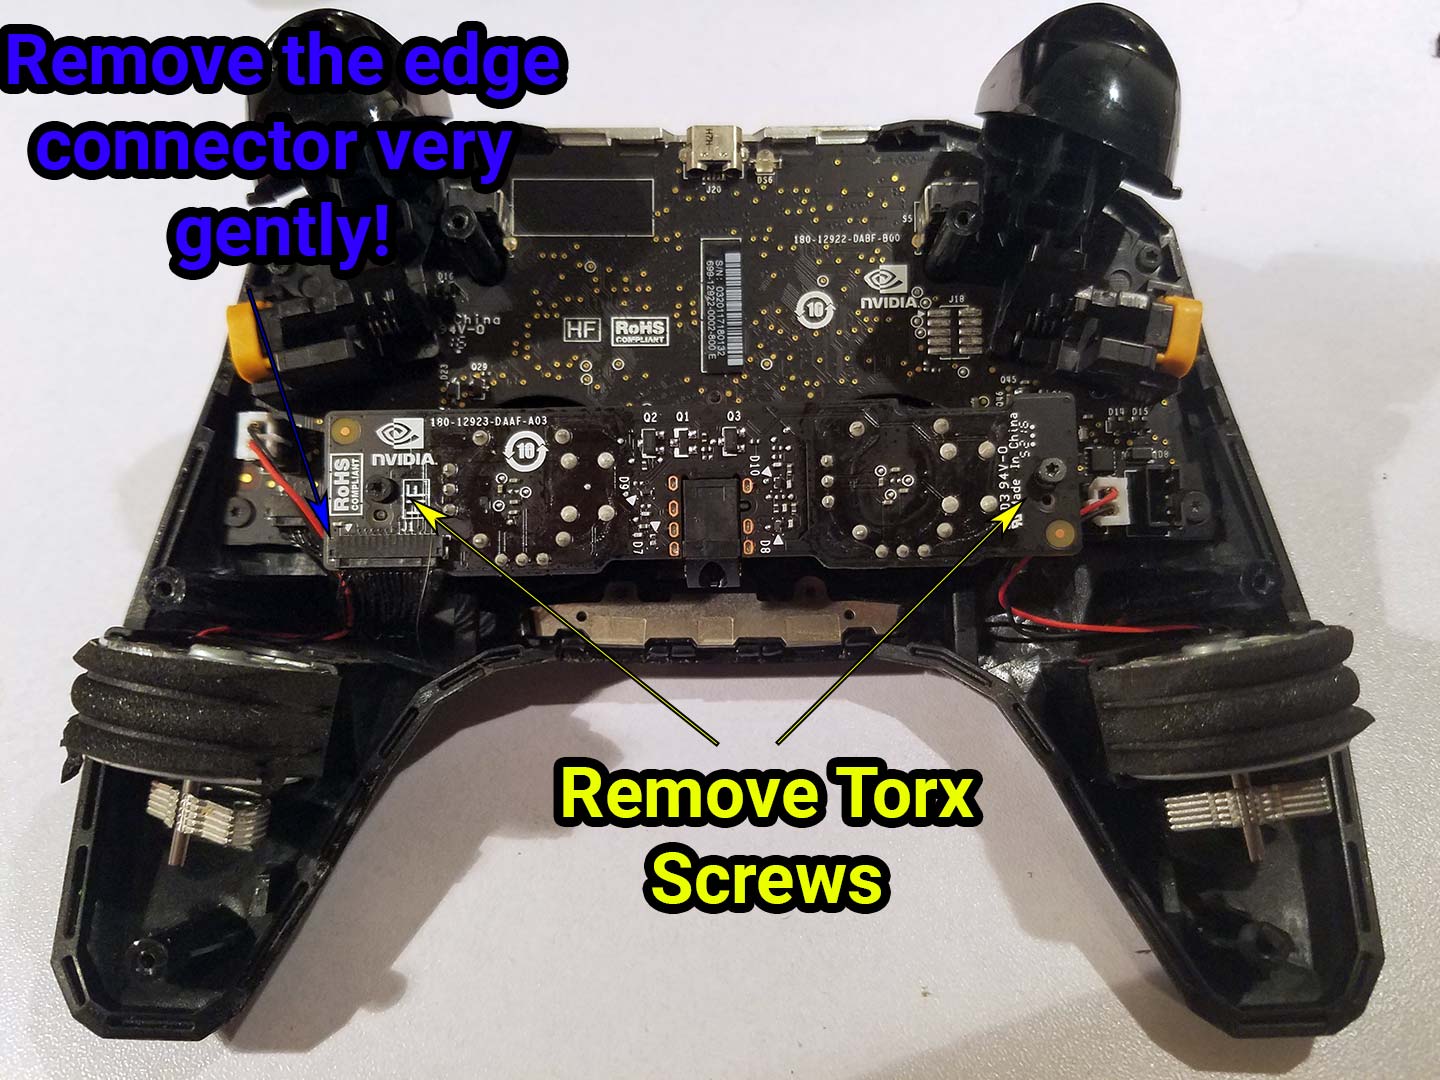 remove edge connector and torx screws.